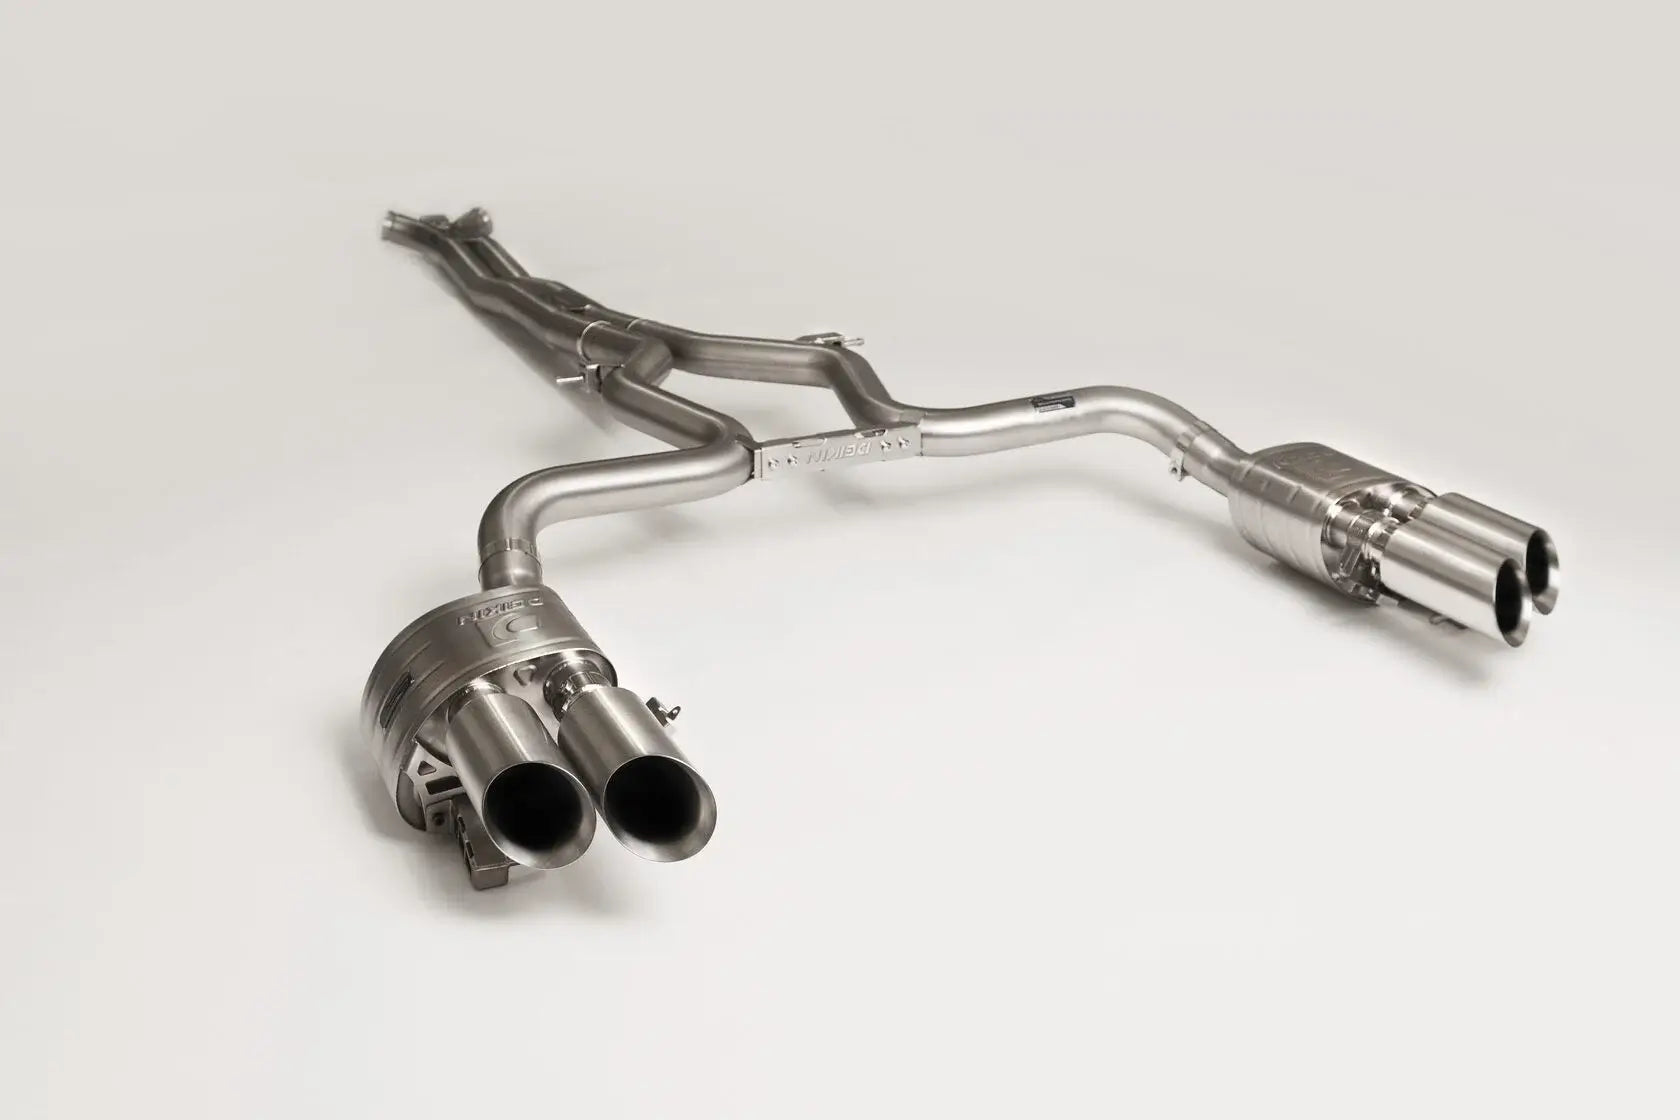 DEIKIN 10-PO.PAN.T/GTS.971/ES-SS-04 Exhaust system Stainless steel for Porsche Panamera Turbo/GTS (971) complete with downpipes HeatShield Burnt Titanium Photo-0 